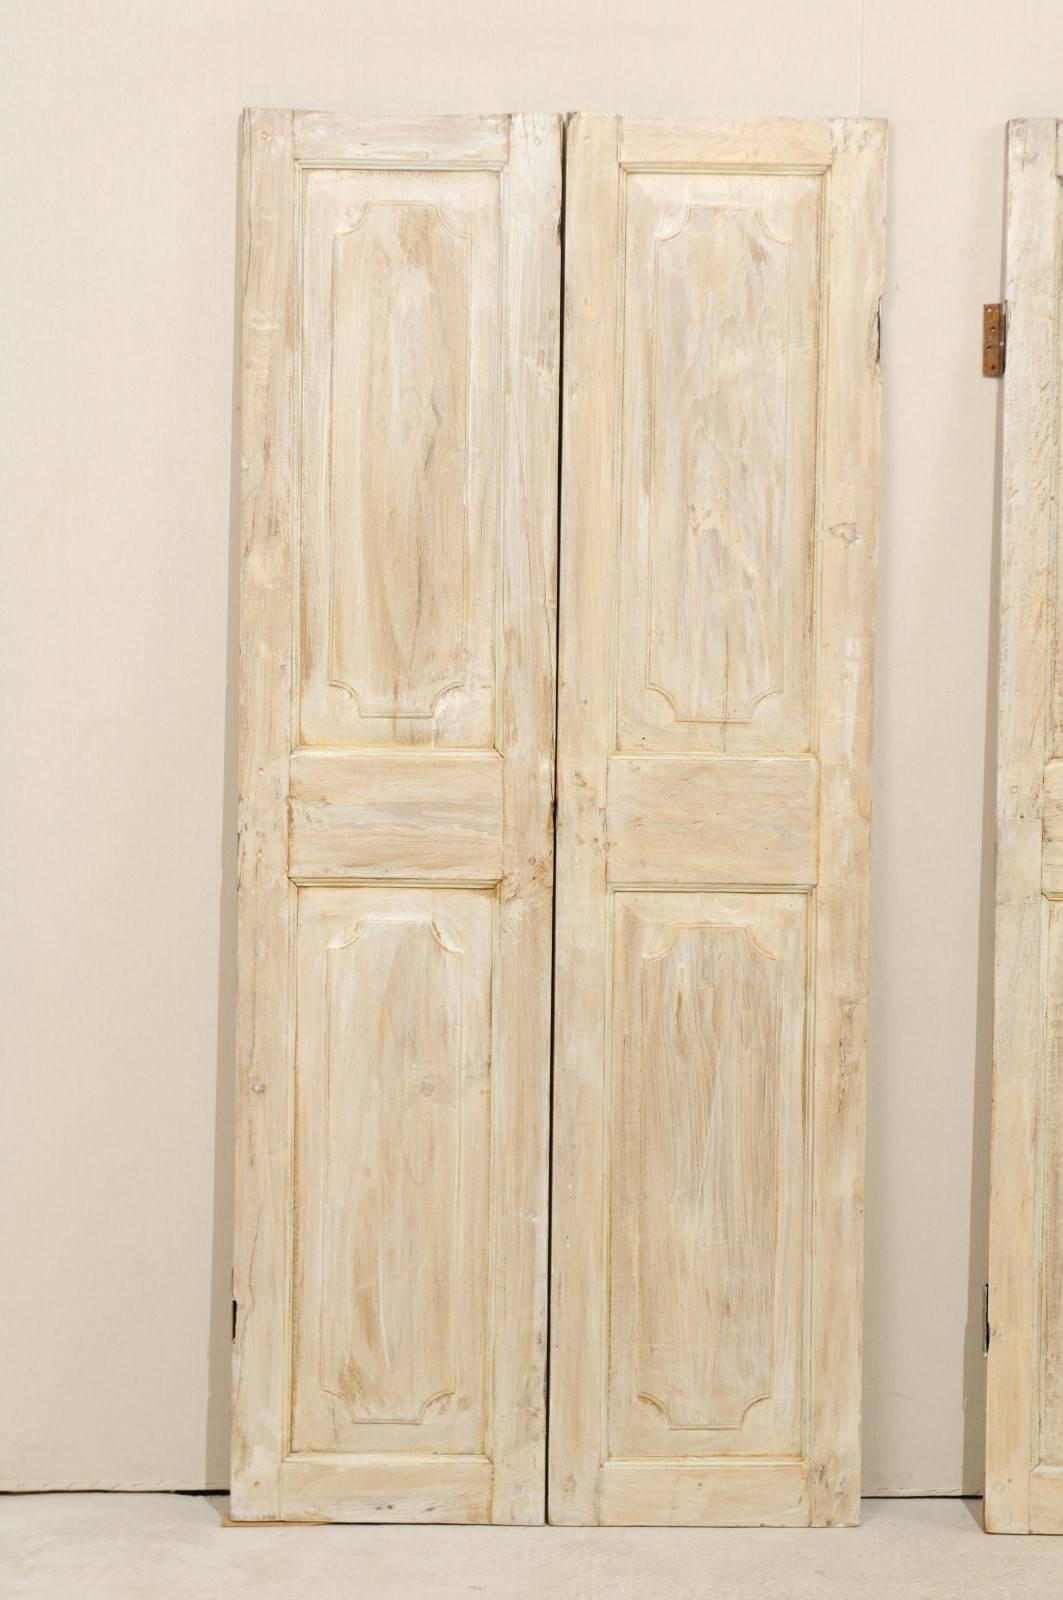 One Pair of Lovely French 19th Century Doors in Antiqued Beige and White Hues 3